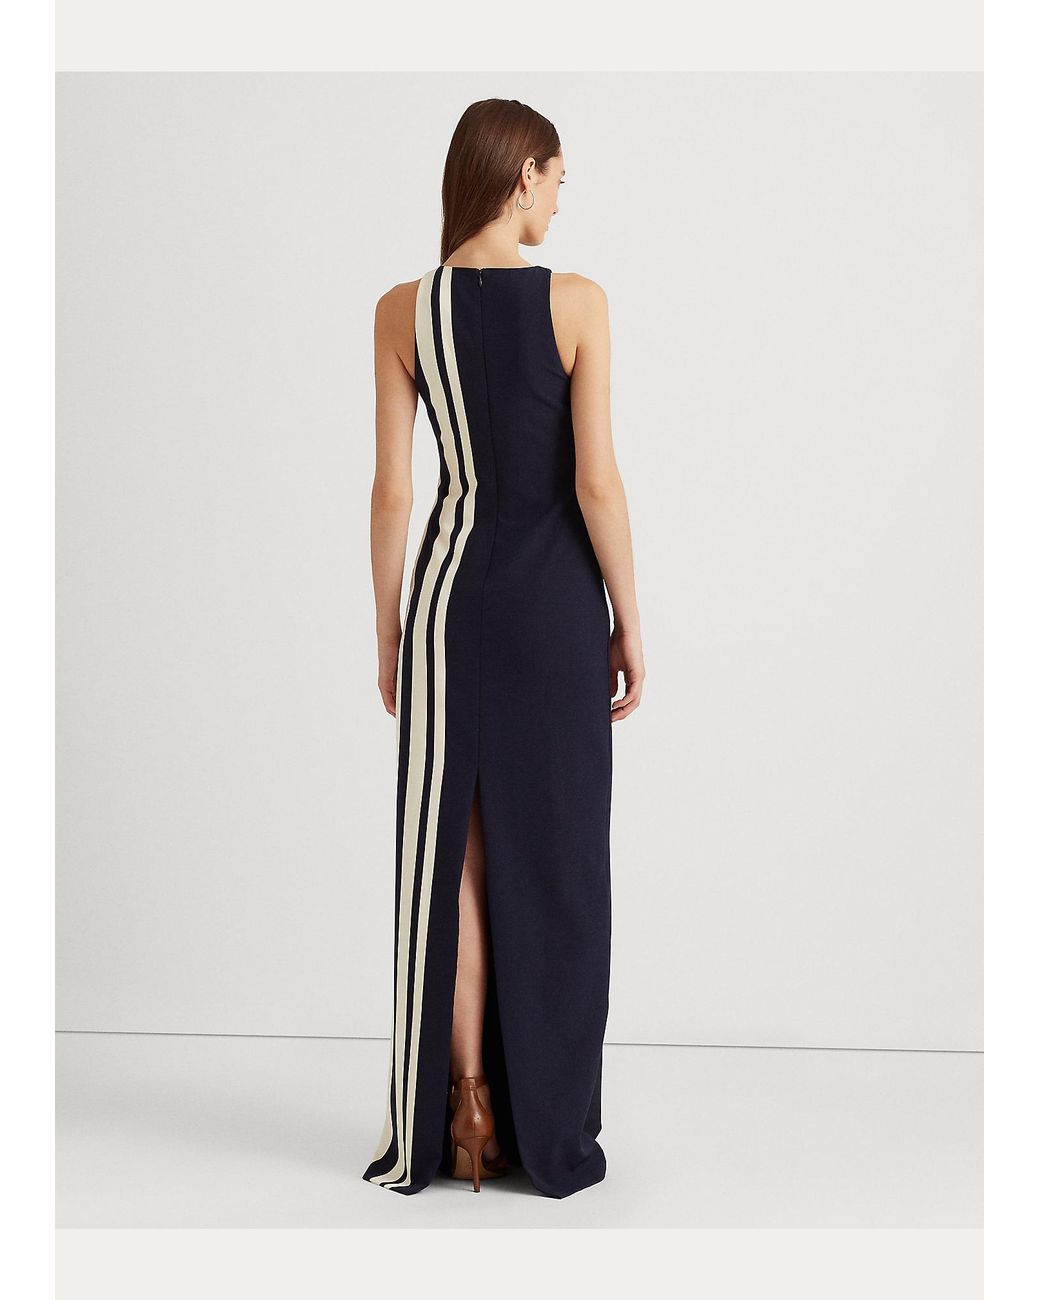 Ralph Lauren Striped Crepe Sleeveless Gown in French Navy (Blue 